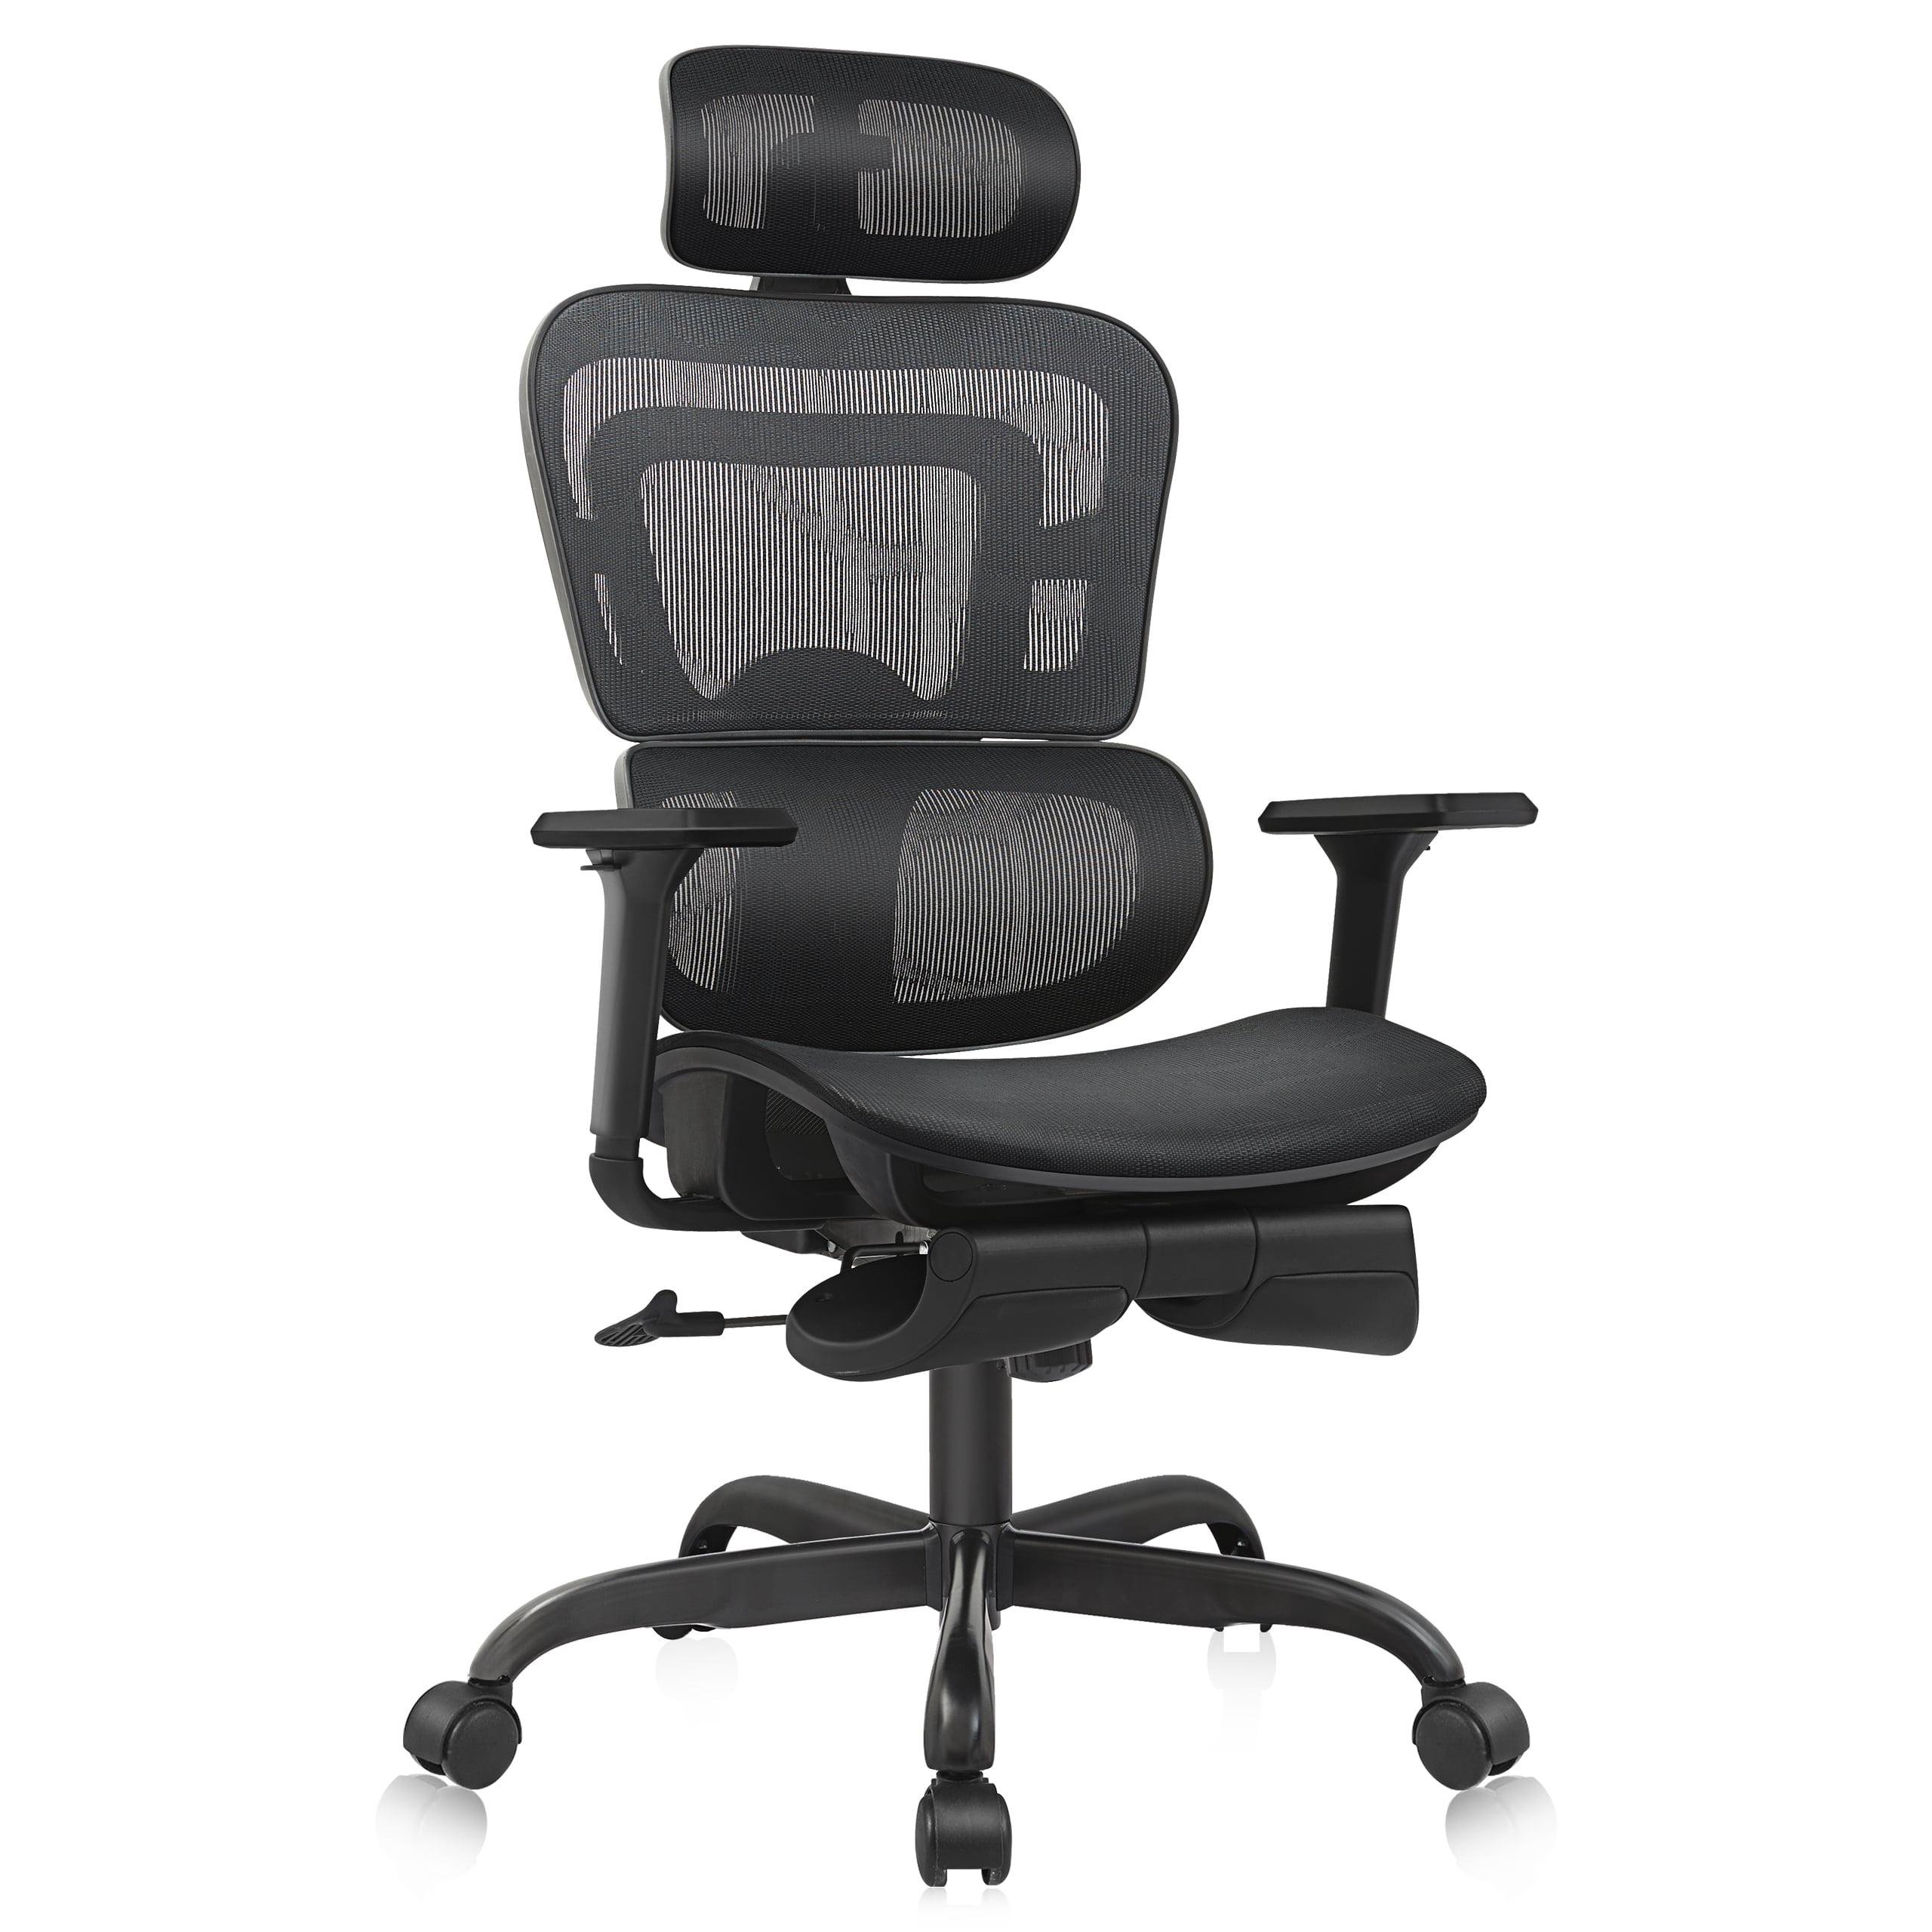 Coolhut Ergonomic Office Chair, Comfort Desk Chair with Adjustable Lumbar  Support and Flip up Arms, 300lb, Black